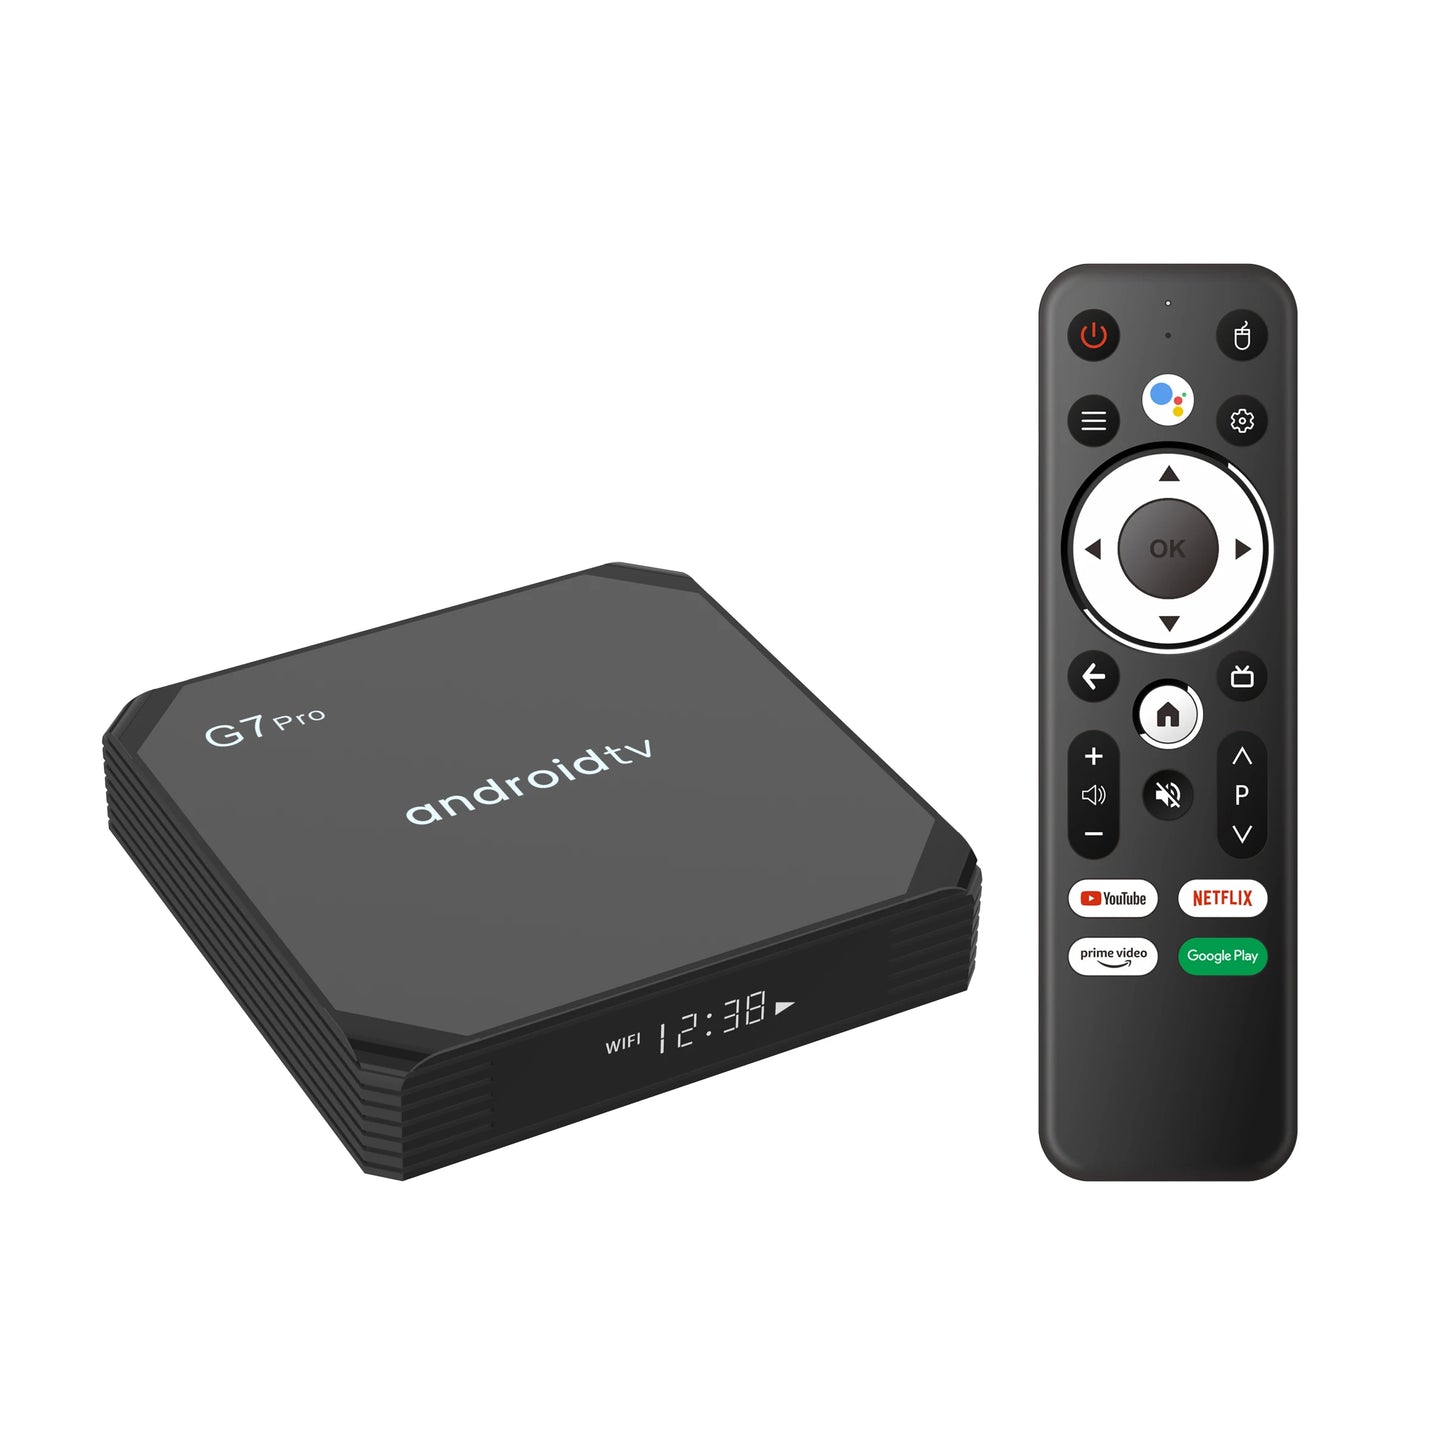 tv box android, smart tv box, box android, smart tv box android